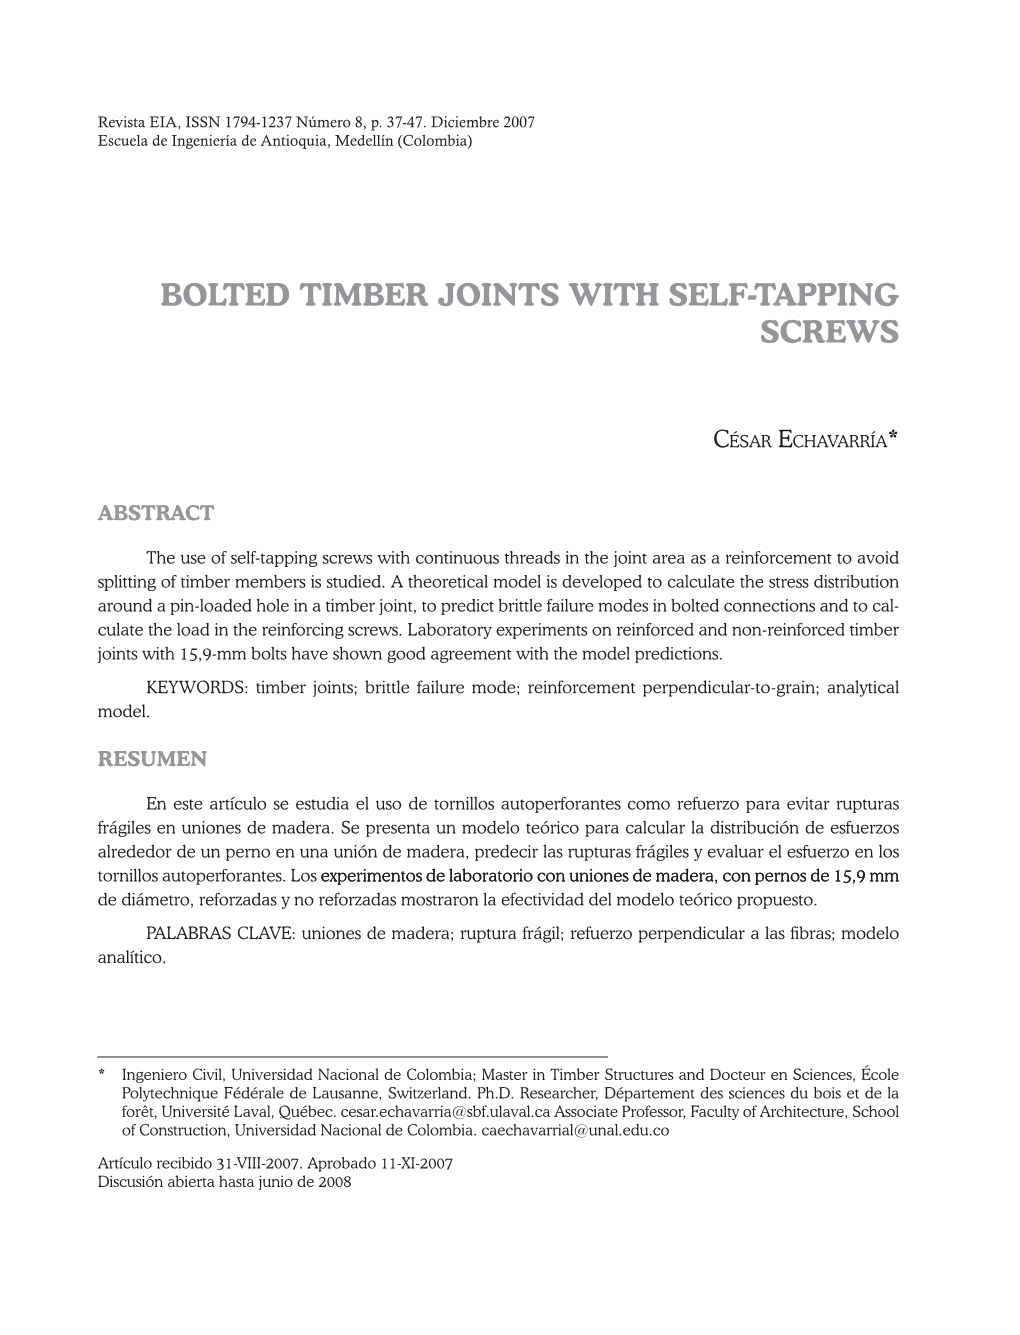 Bolted Timber Joints with Self-Tapping Screws